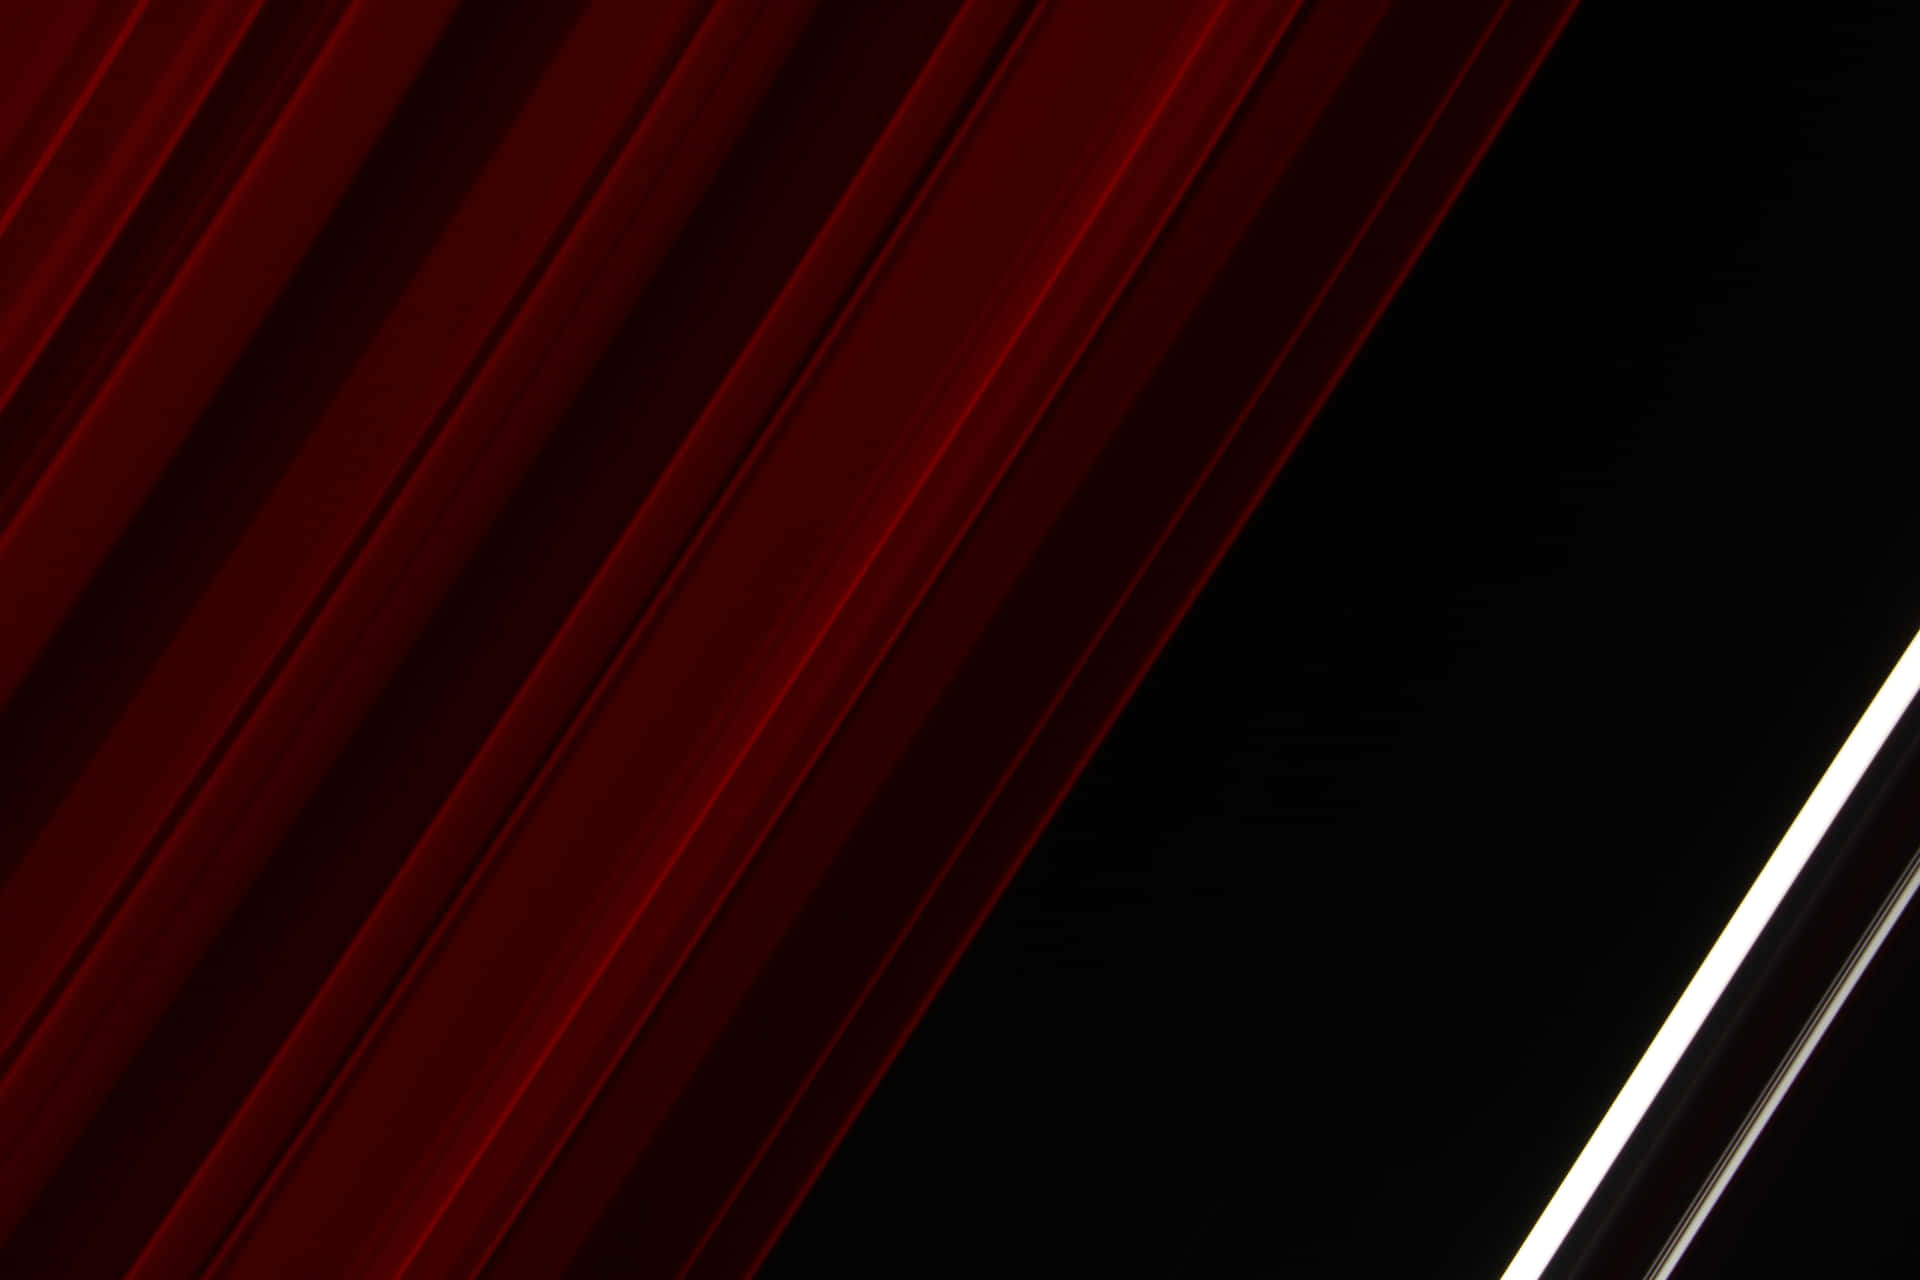 Black And Red Super Amoled Display Wallpaper